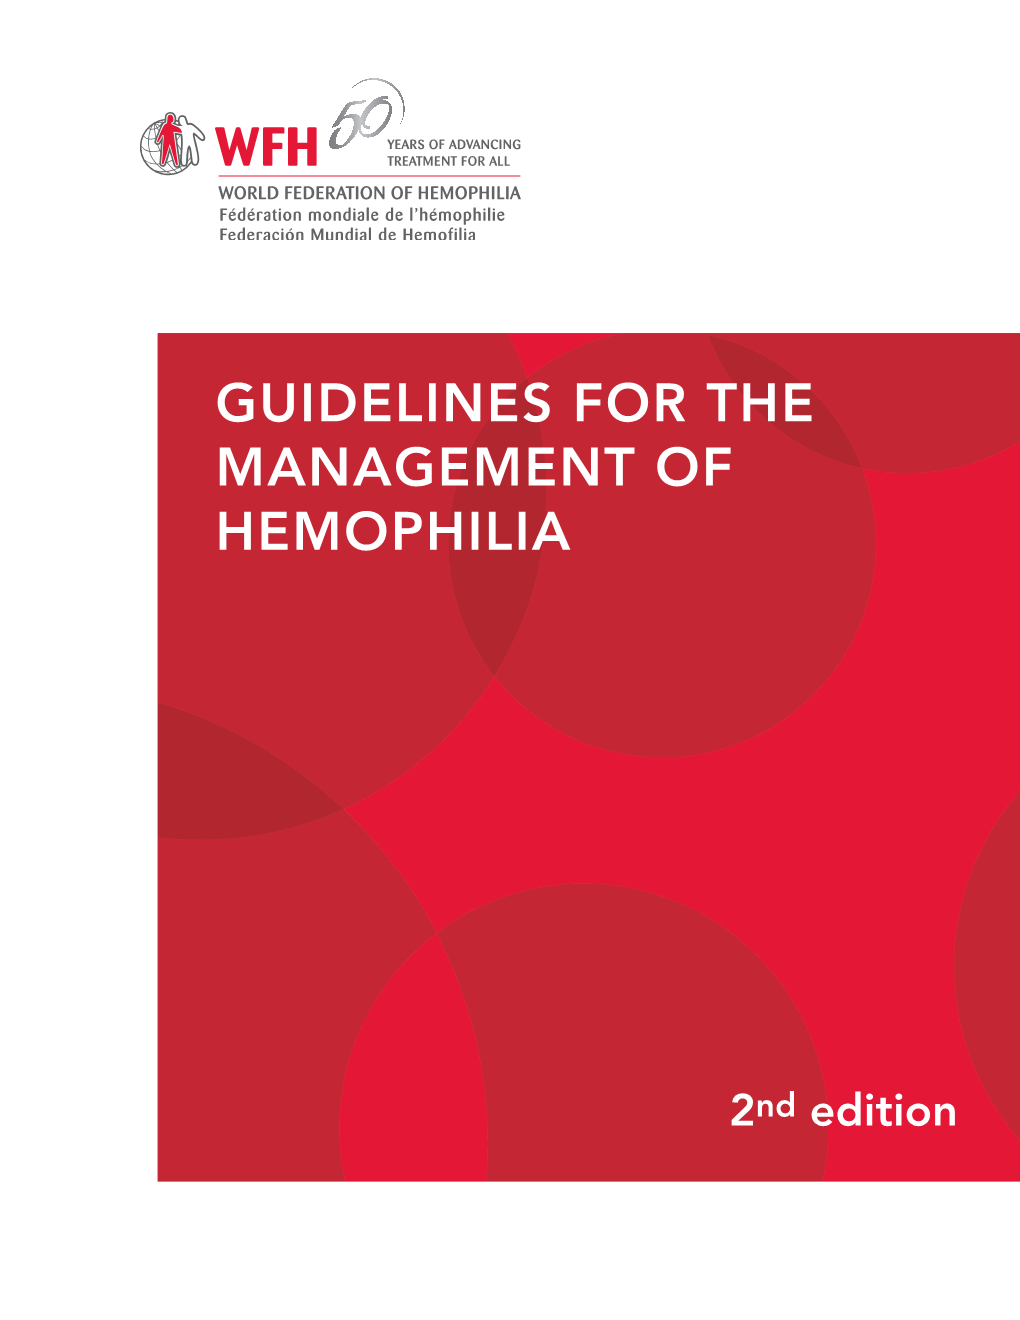 WFH Guidelines for the Management of Hemophilia